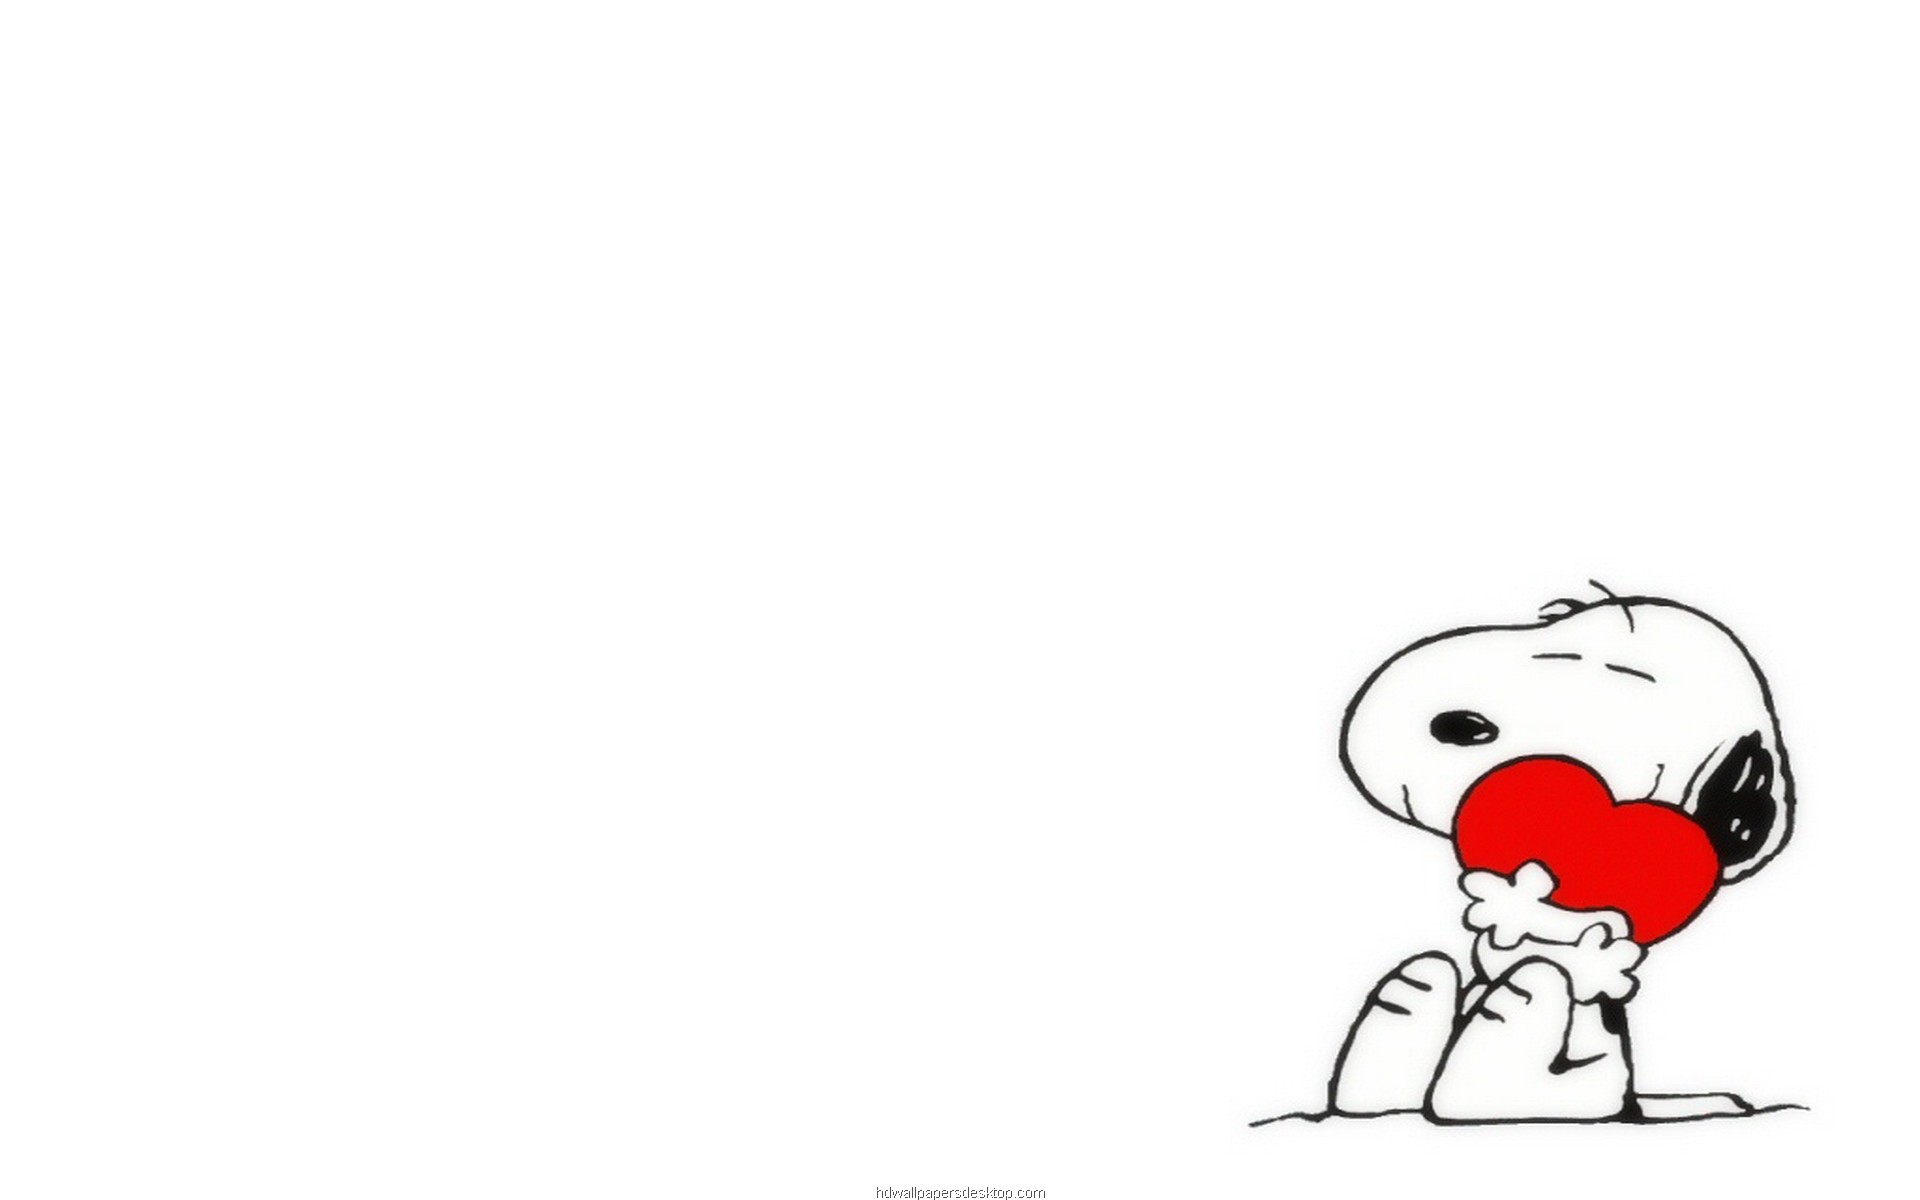 Download image Free Snoopy Spring Desktop Wallpaper PC, Android .